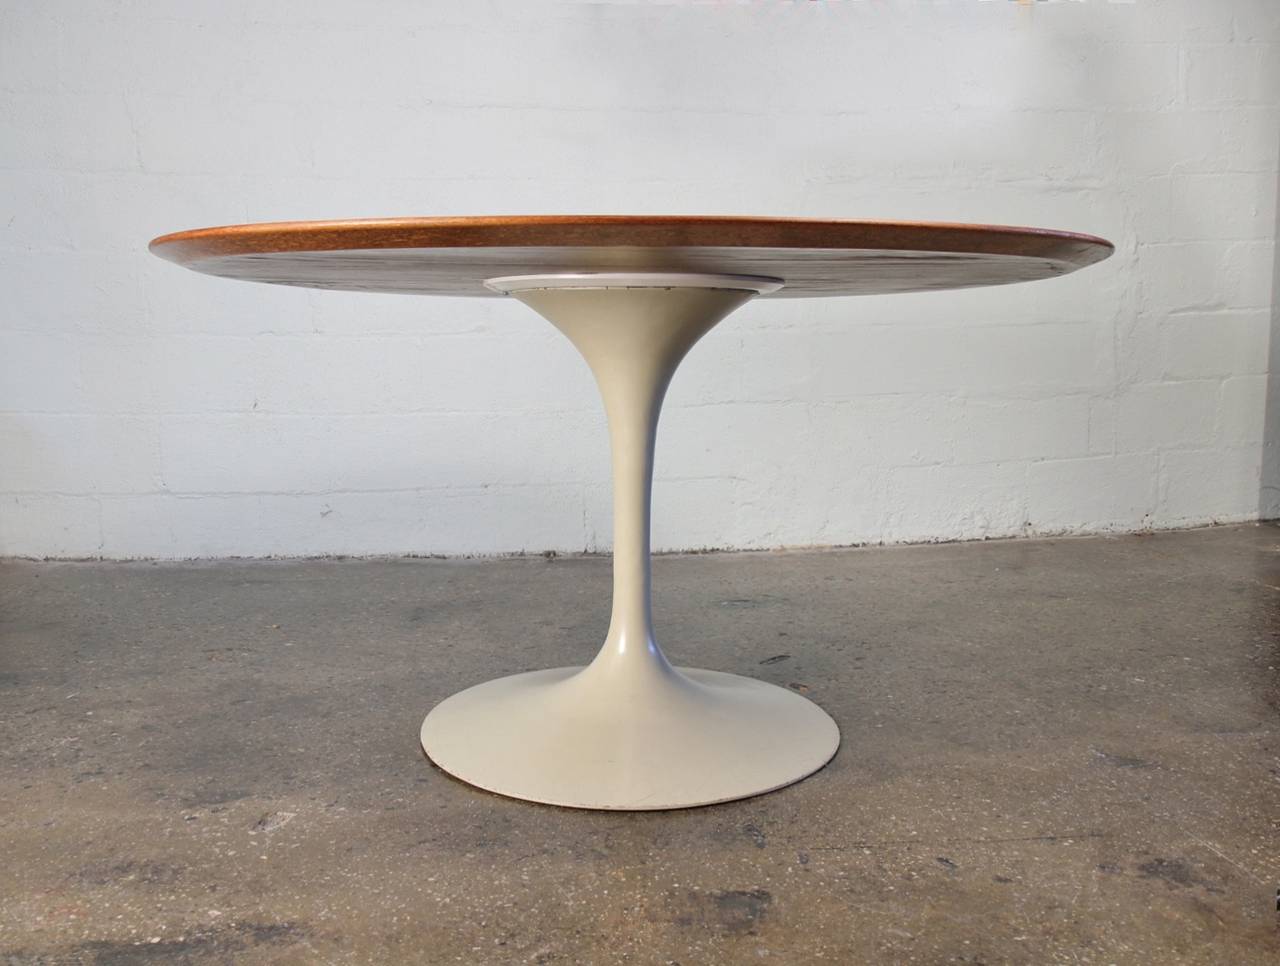 Pedestal table designed by Eero Saarinen for Knoll dates to the 1960s. Gorgeous round walnut top on a white powder-coated pedestal. The dining table comfortably seats six. In excellent condition; the wood top shows very little wear and has beautiful